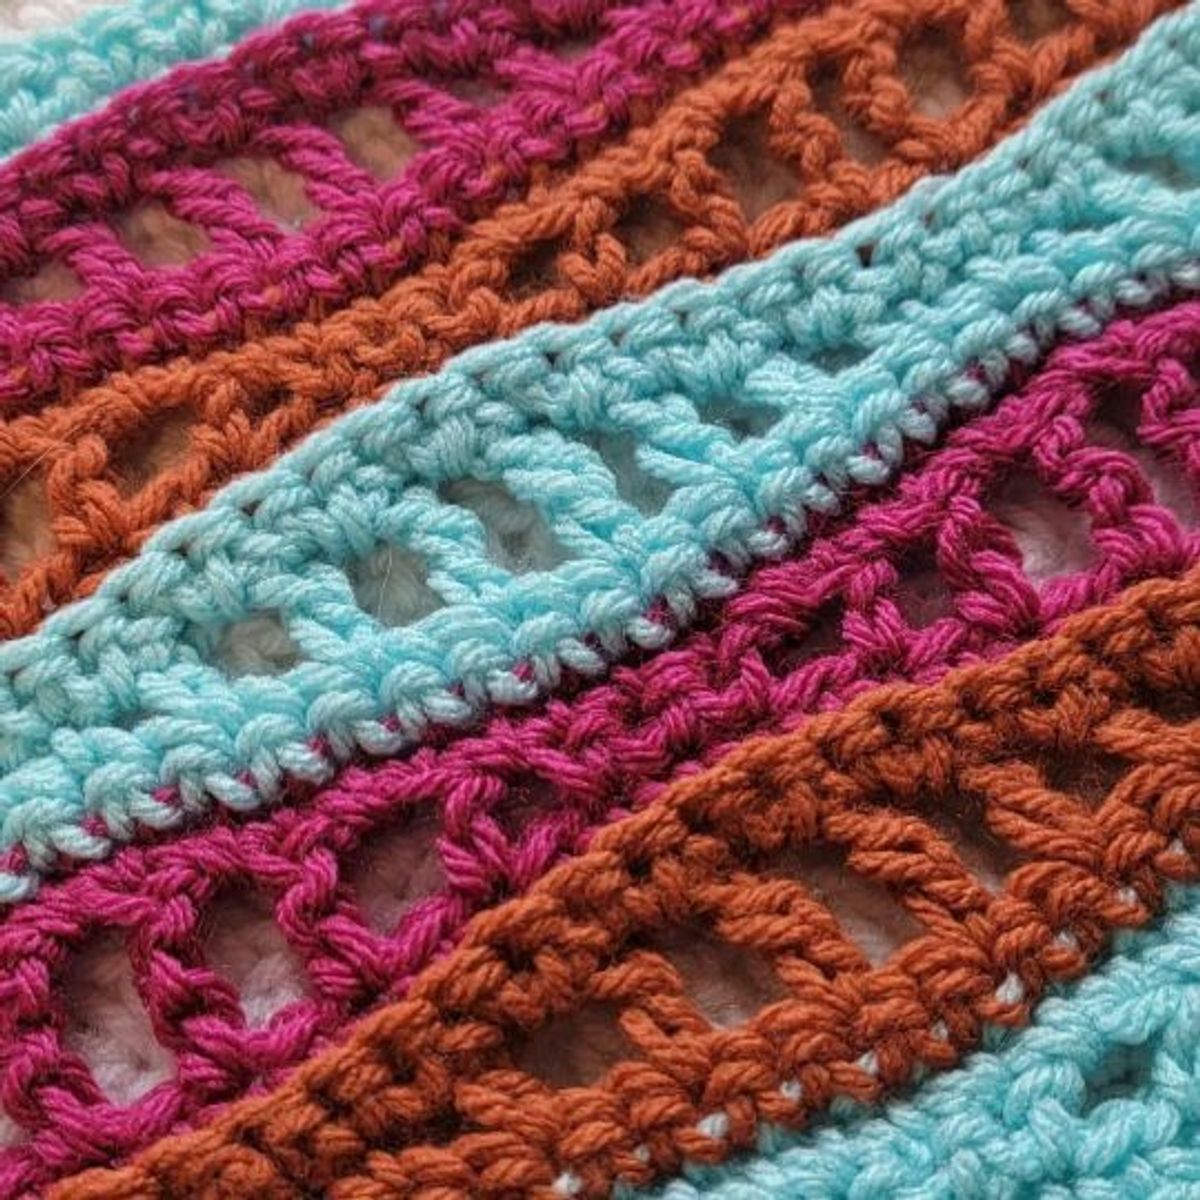 Photo Tutorial – How To Crochet: The Open Wave Stitch